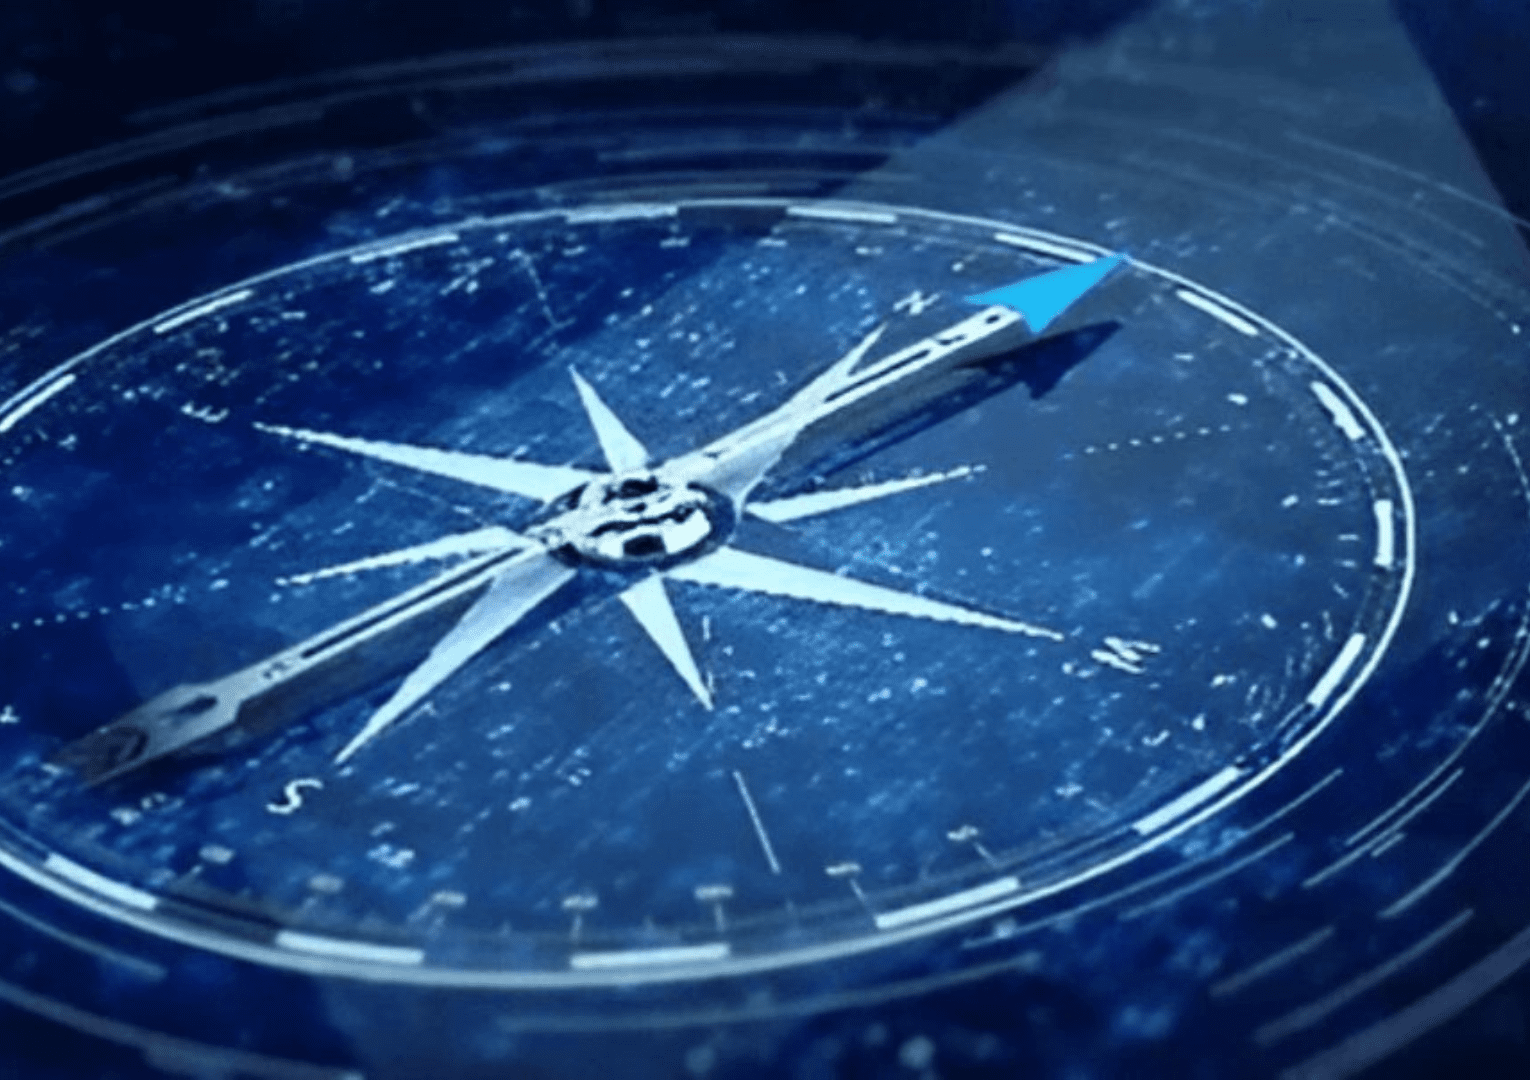 A close up view of a compass in blue color1